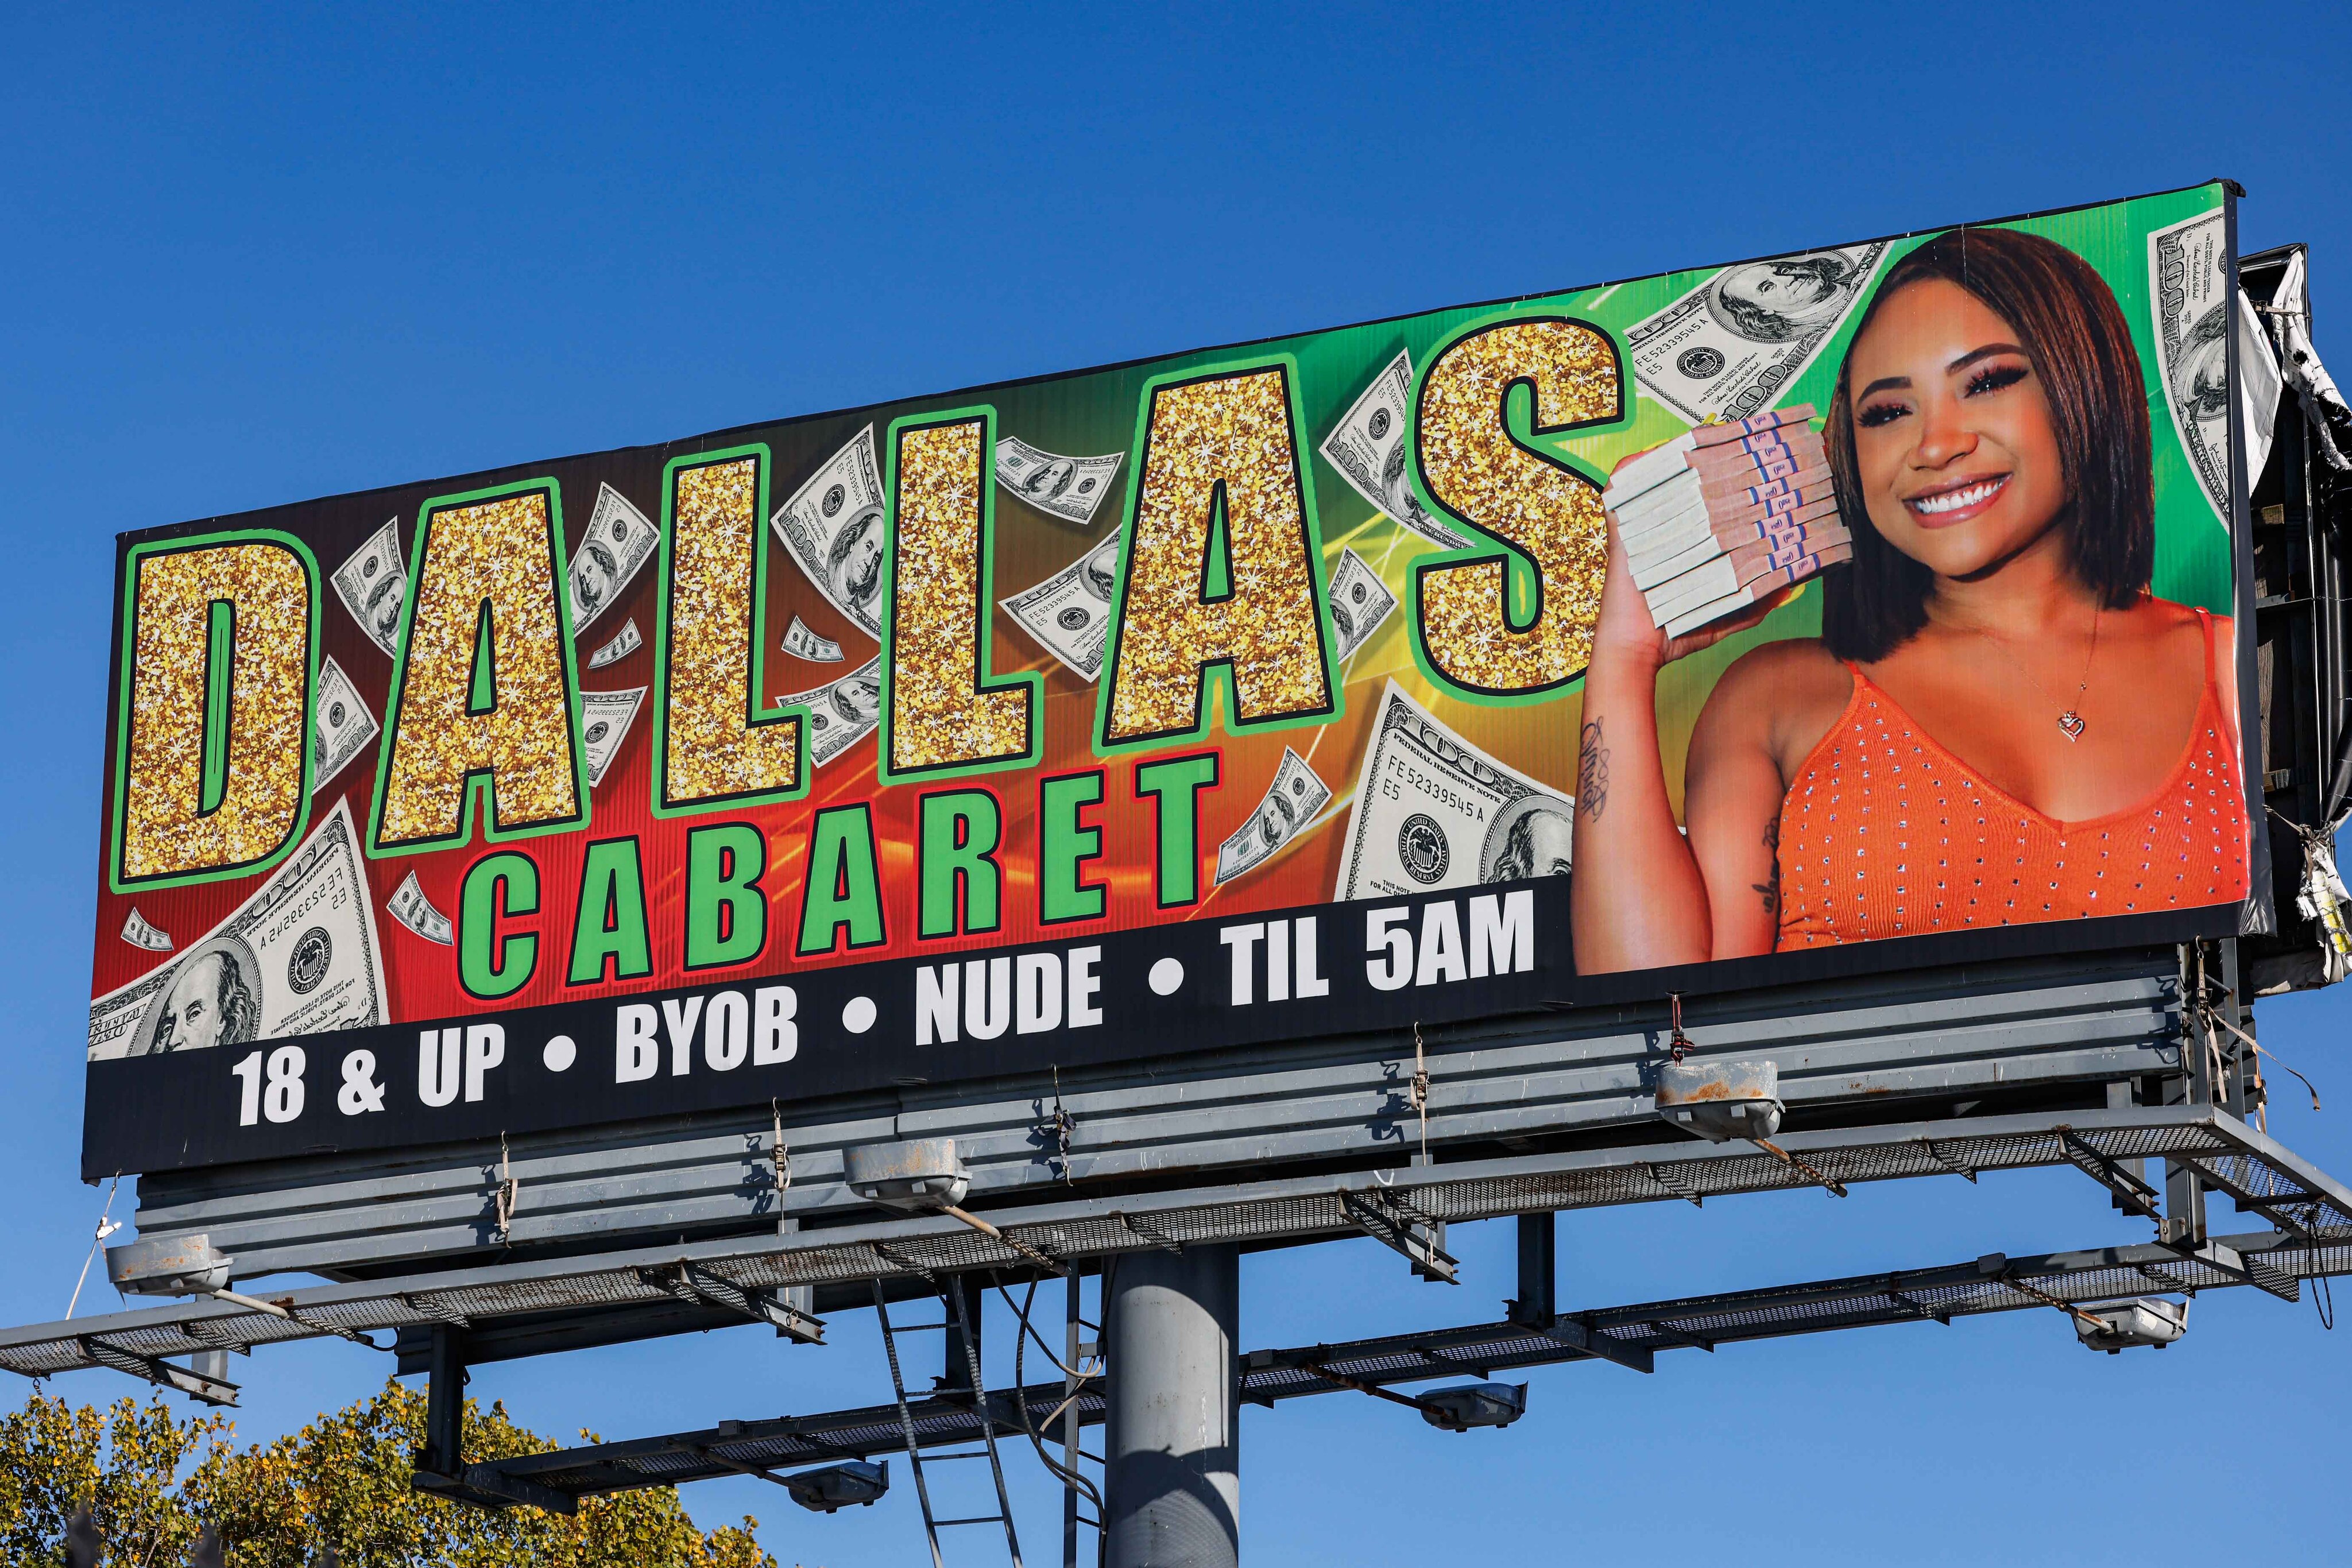 Dallas police want strip clubs, sex businesses to close by 2 a.m. pic picture